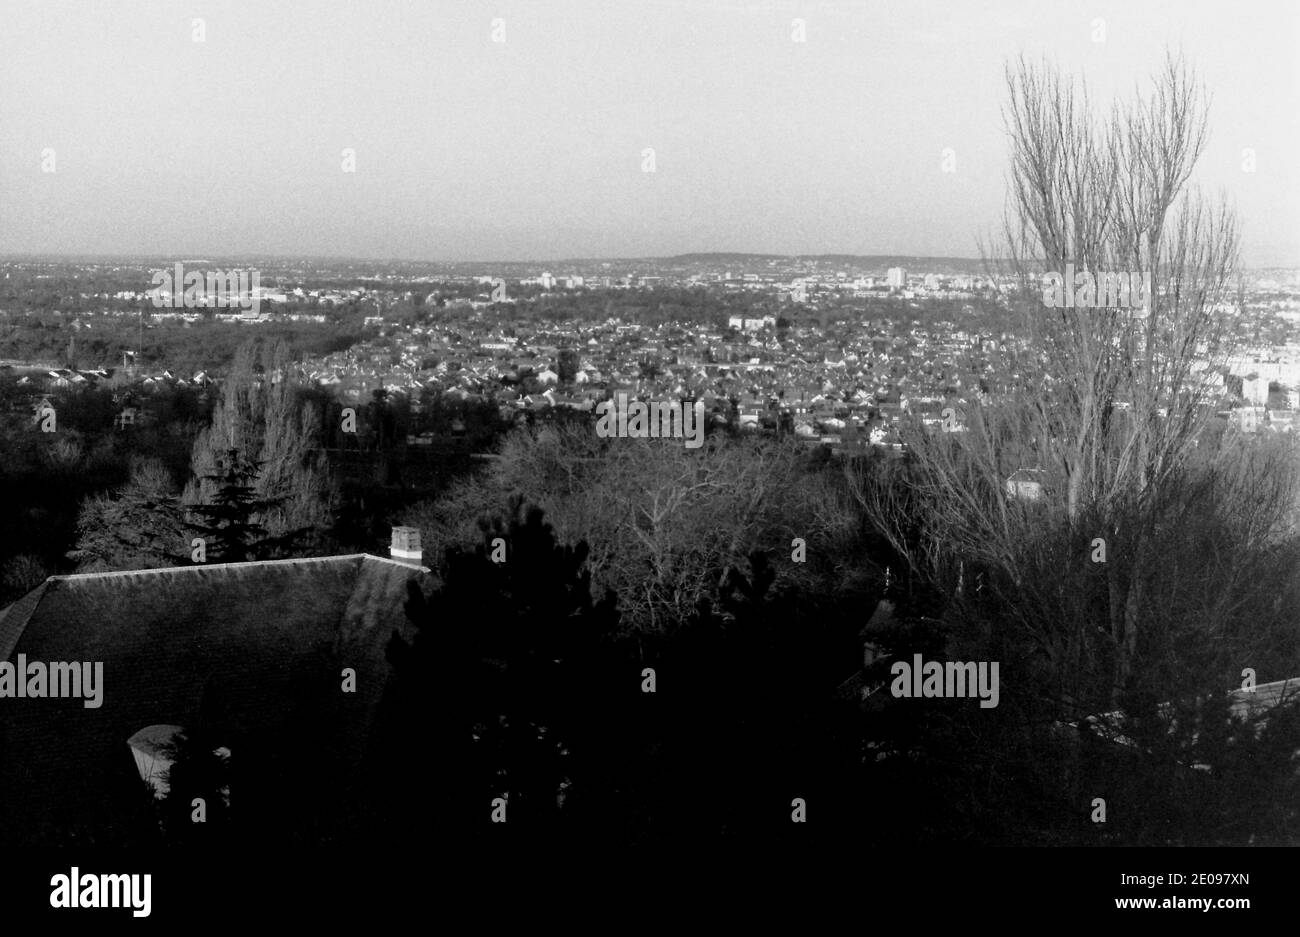 AJAXNETPHOTO.  LOUVECIENNES,FRANCE. - DISTANT SUBURBS - LOOKING NORTH TOWARD CROISSY SUR SEINE AND LE VESINET FROM ALLEE DES SOUDANES. A SCENE VIEWED BY 19TH CENTURY IMPRESSIONIST ARTISTS WHO LIVED IN AND WORKED IN THE AREA. PHOTO:JONATHAN EASTLAND/AJAX REF:RX131208 882 Stock Photo